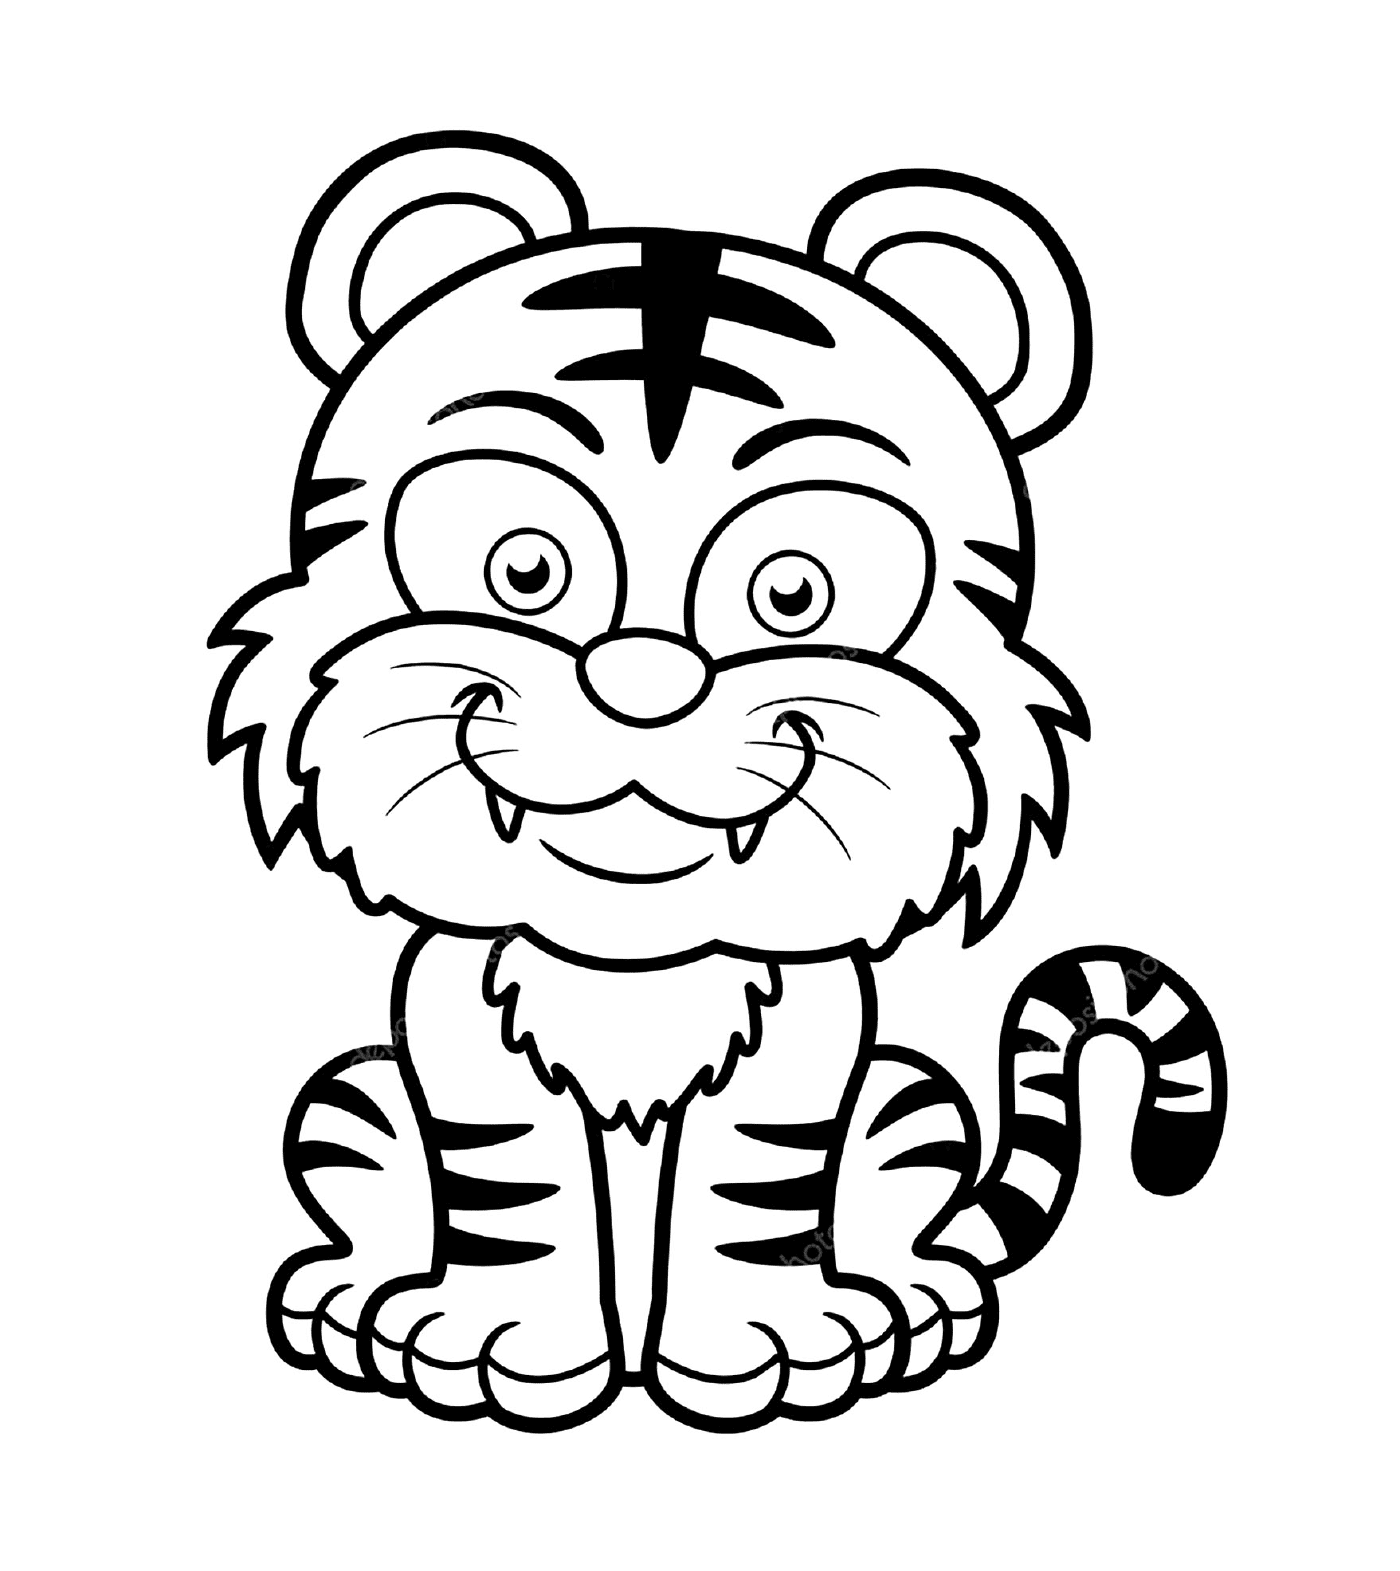  An easy tiger for children 